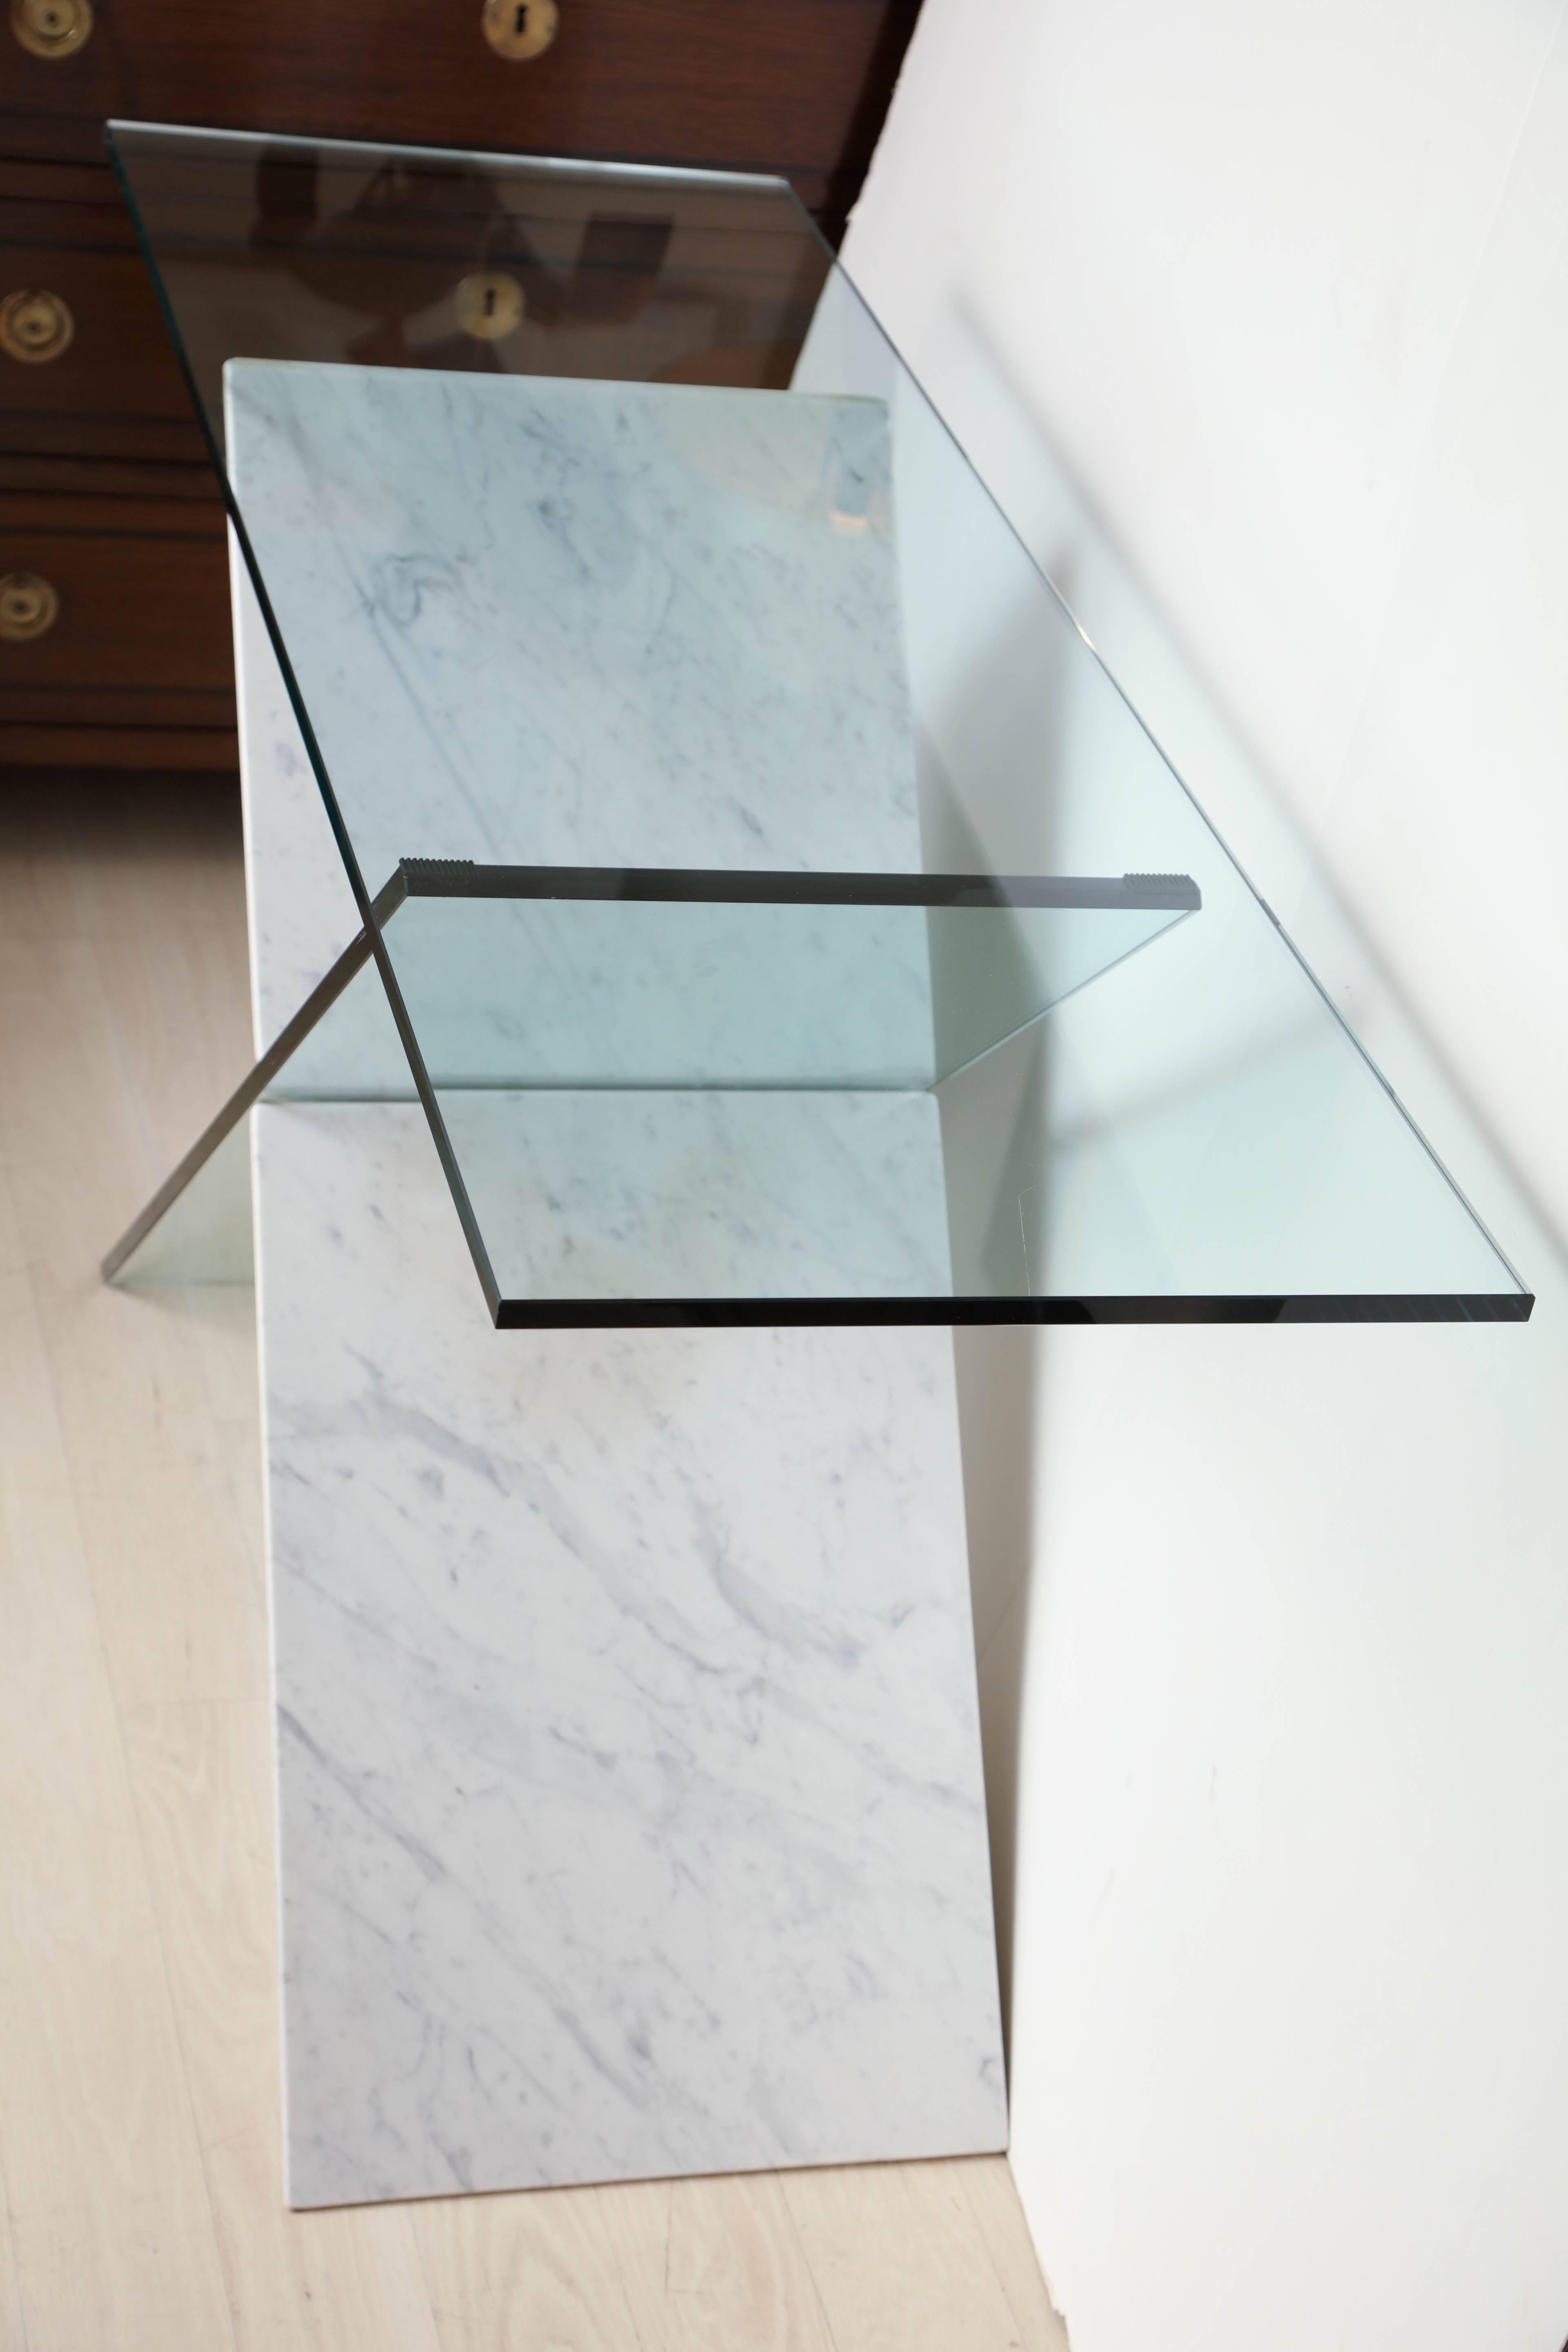 Late 20th Century White Marble and Glass Geometric Console Table by Reflex for Roche Bobois